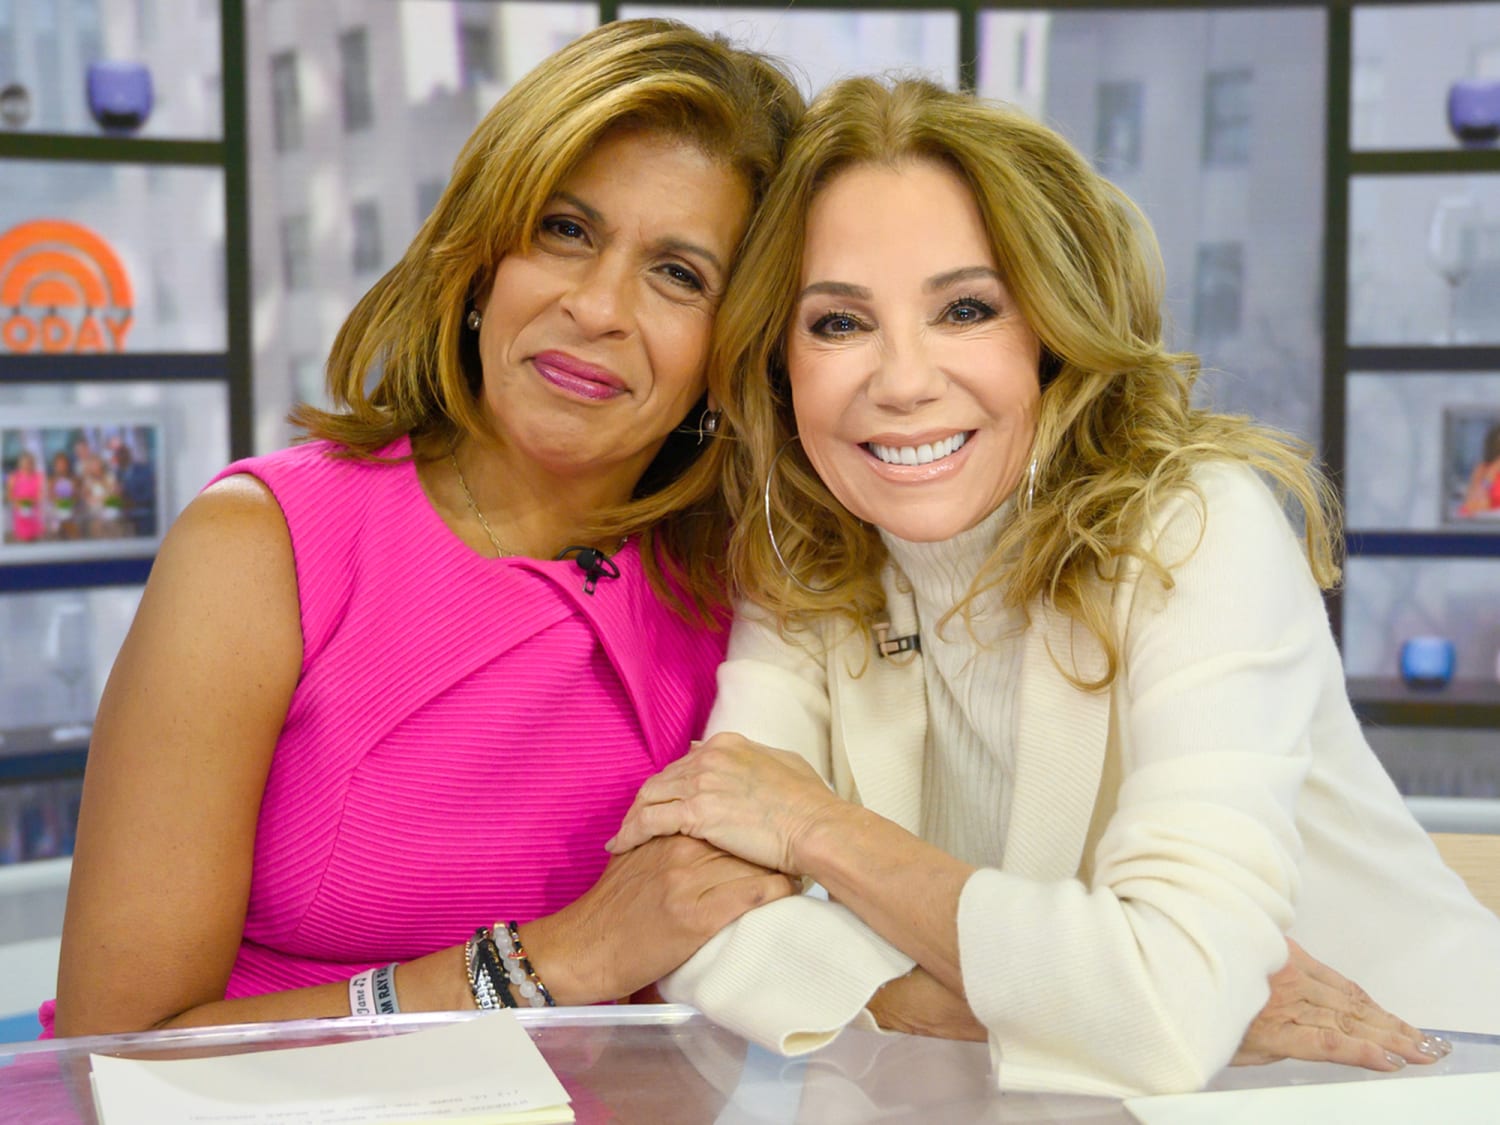 Hoda Kotb Gets Sweet Shoutout from Kathie Lee Gifford After Opening Up  About Mastectomy Scars